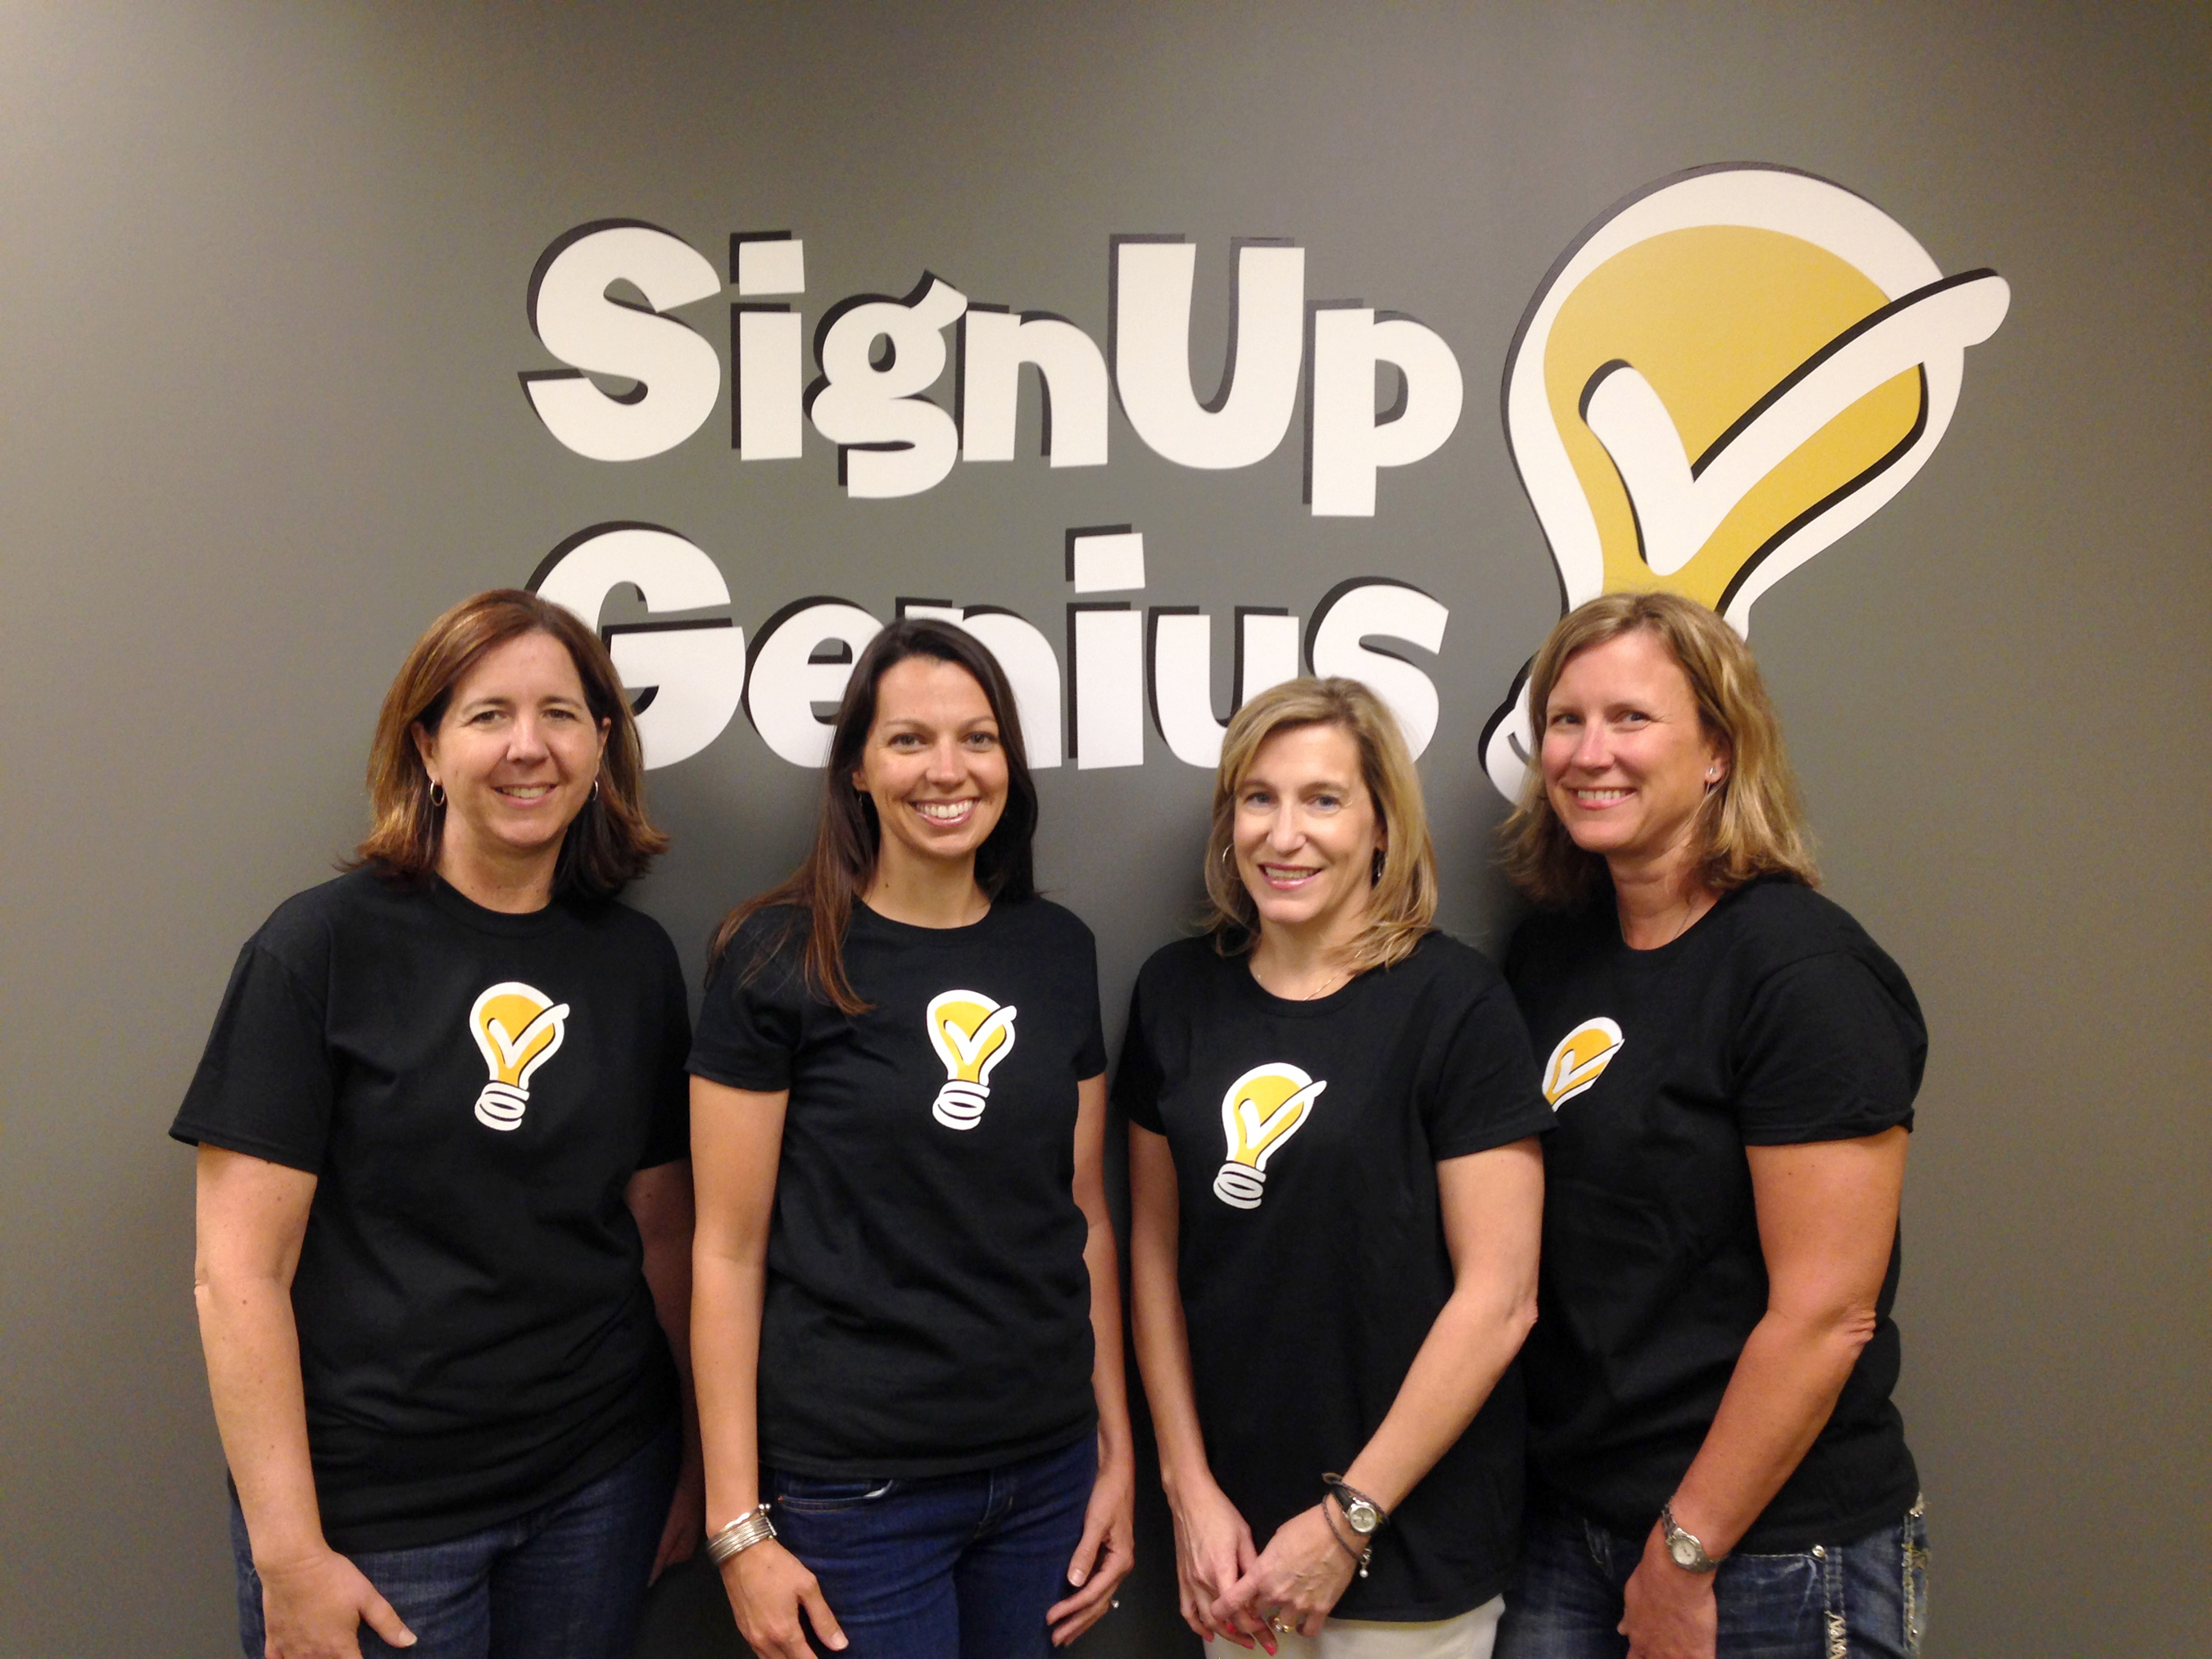 SignUpGenius Customer Support Team (from left to right): Teresa Clark, Rebecca Caswell, Amy Tidwell, Kirsten Mayers (PRNewsFoto/SignUpGenius )